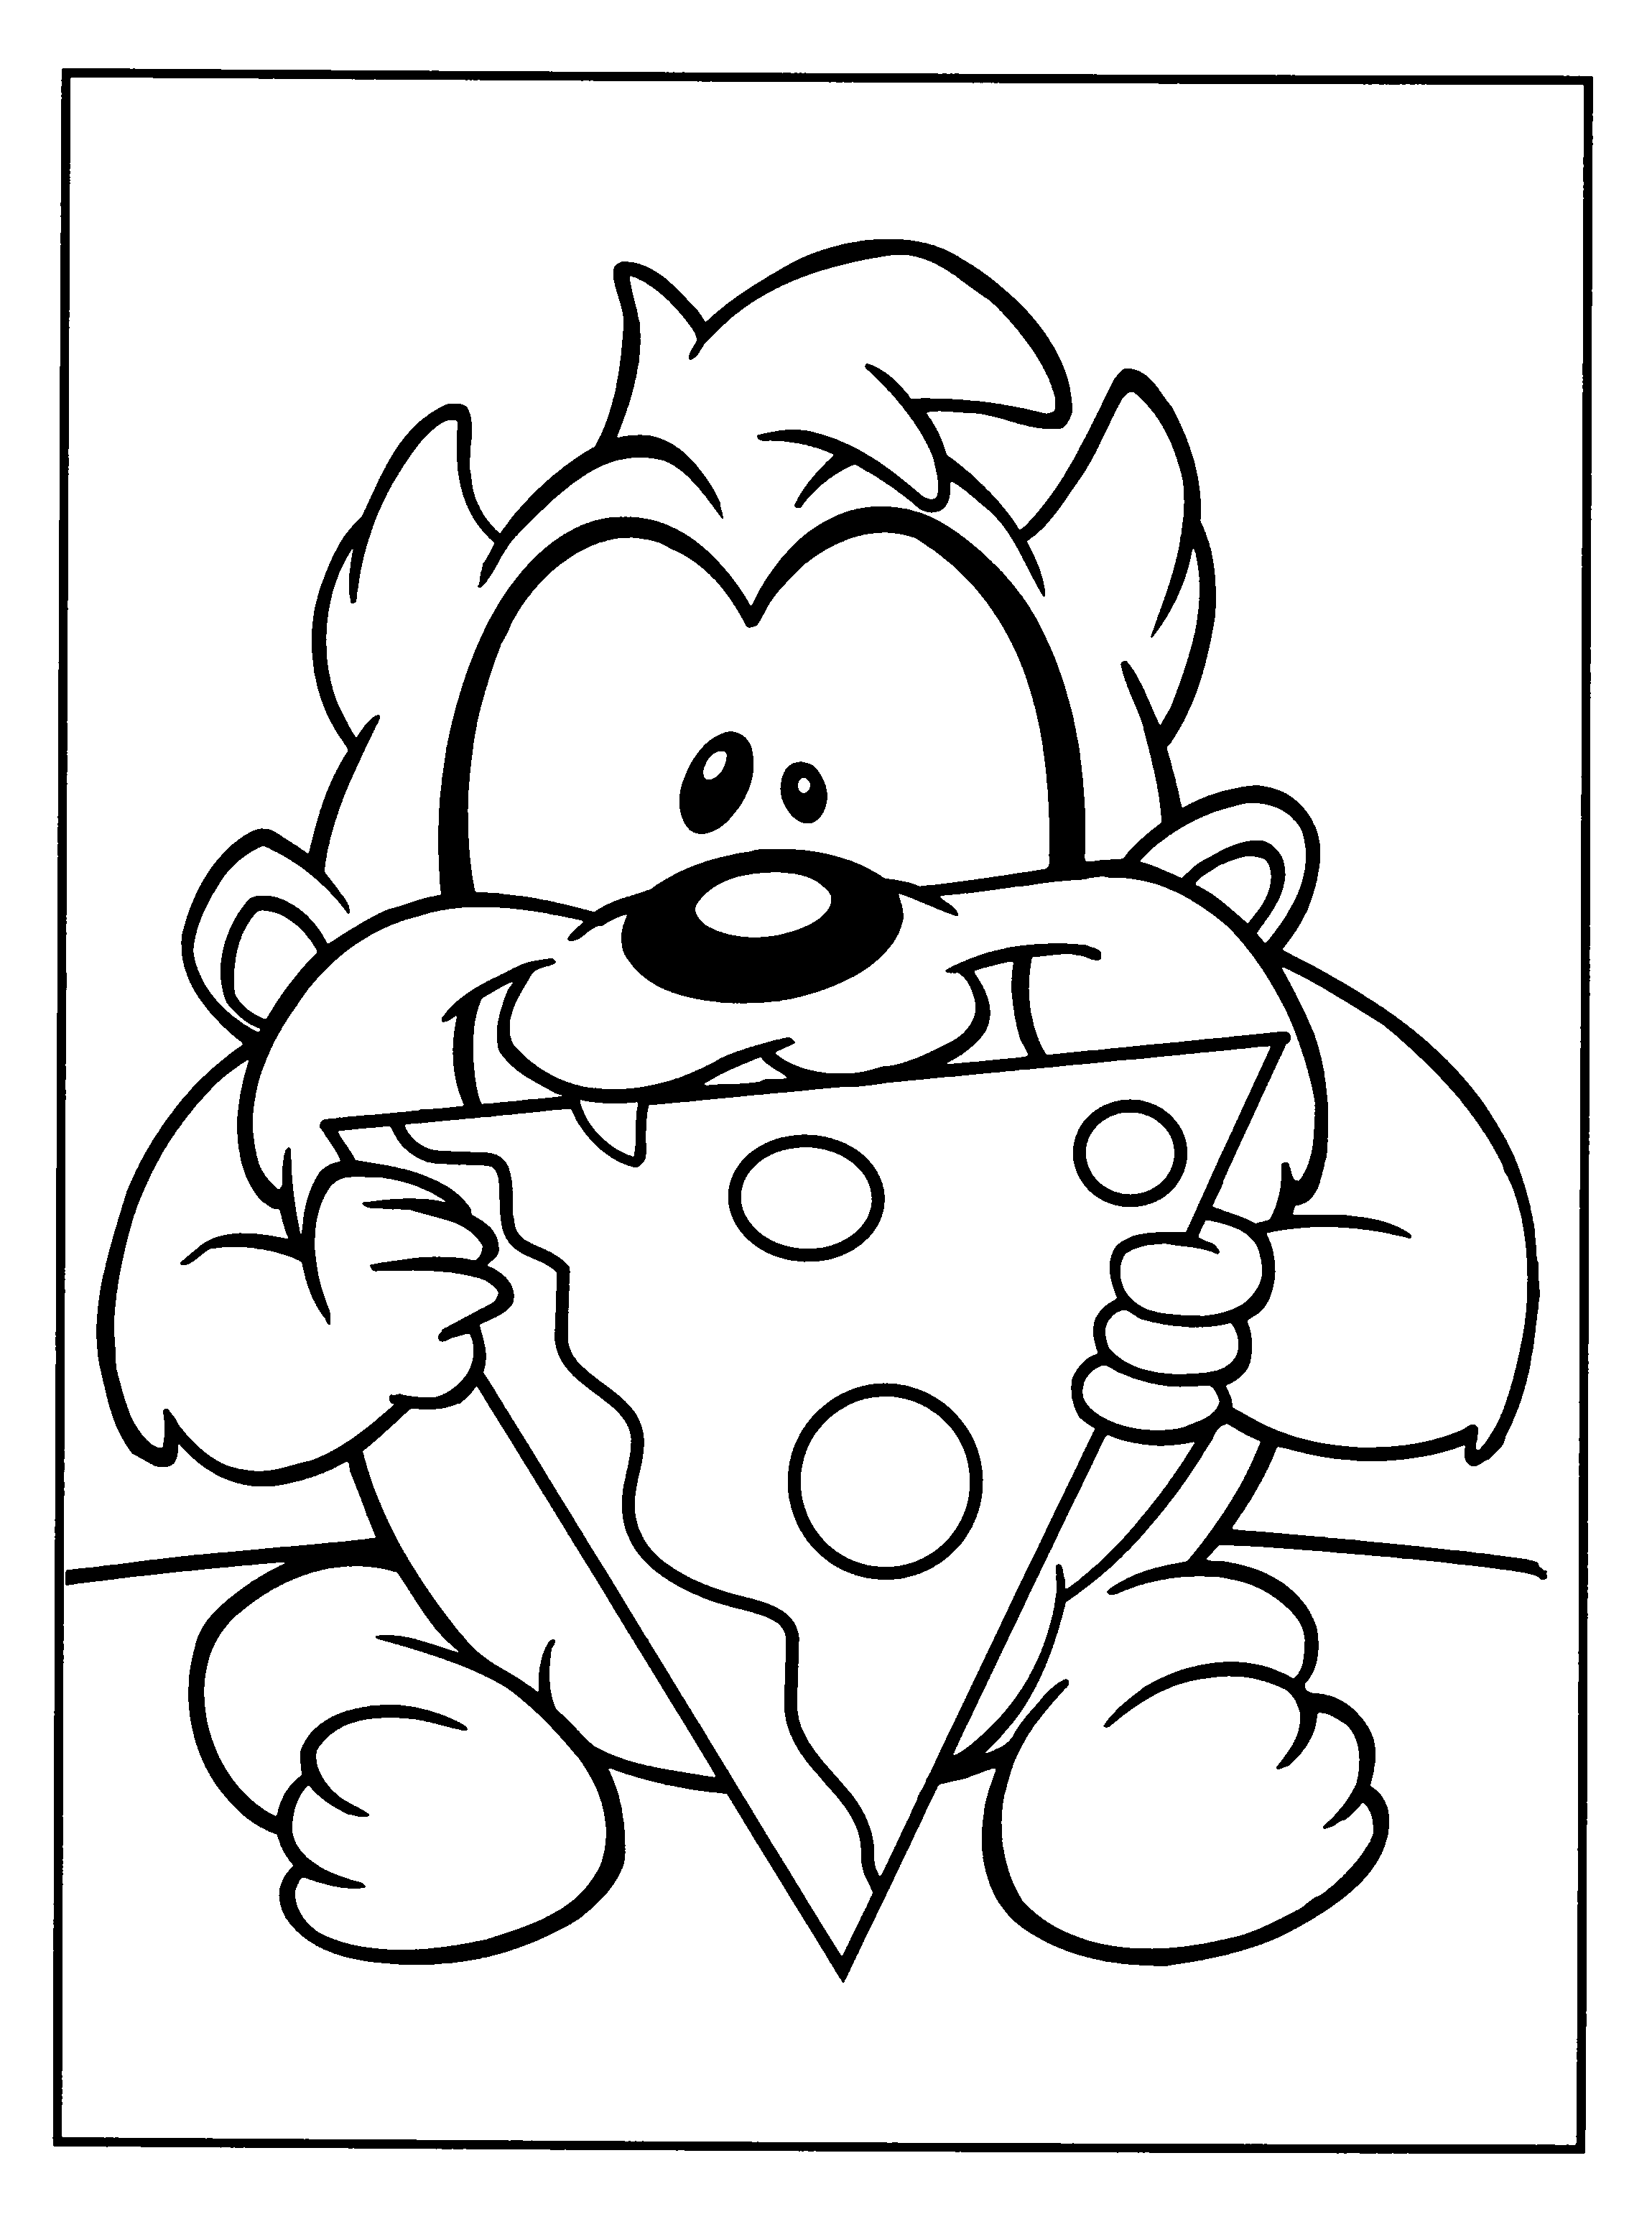 baby looney tunes coloring pages fun coloring pages baby looney tunes coloring pages pages coloring tunes looney baby 